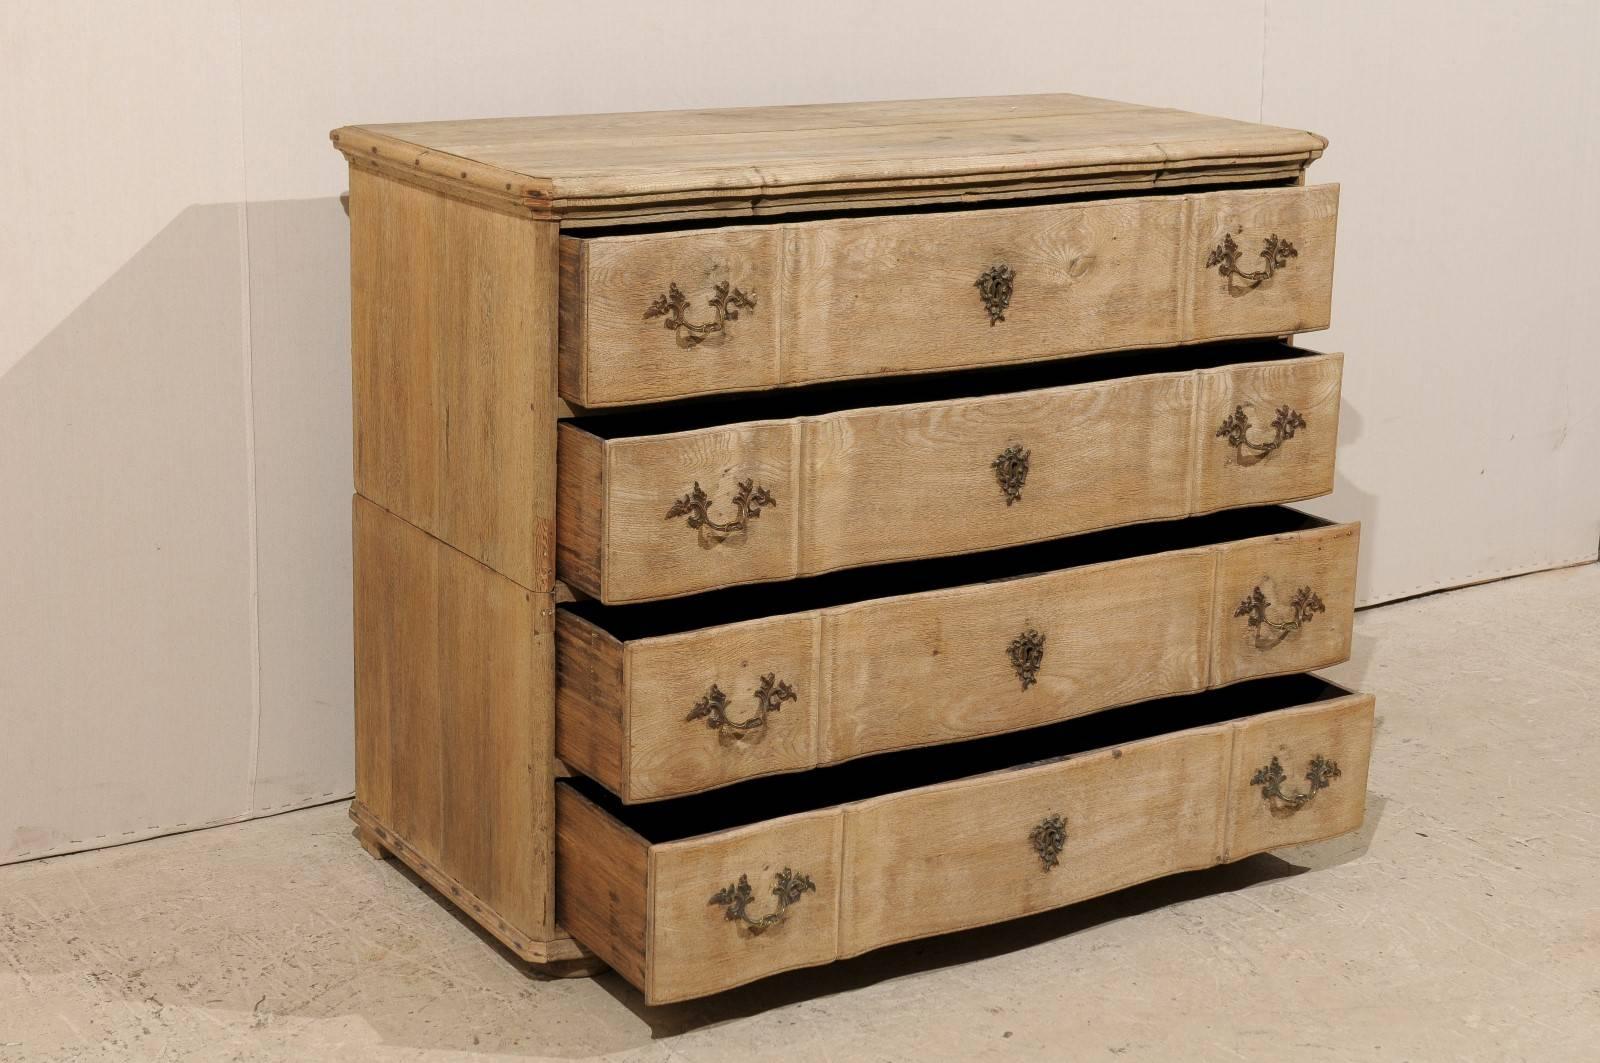 Bleached Dutch Mid-19th Century Chest with Four Drawers Featuring Rococo Style Hardware